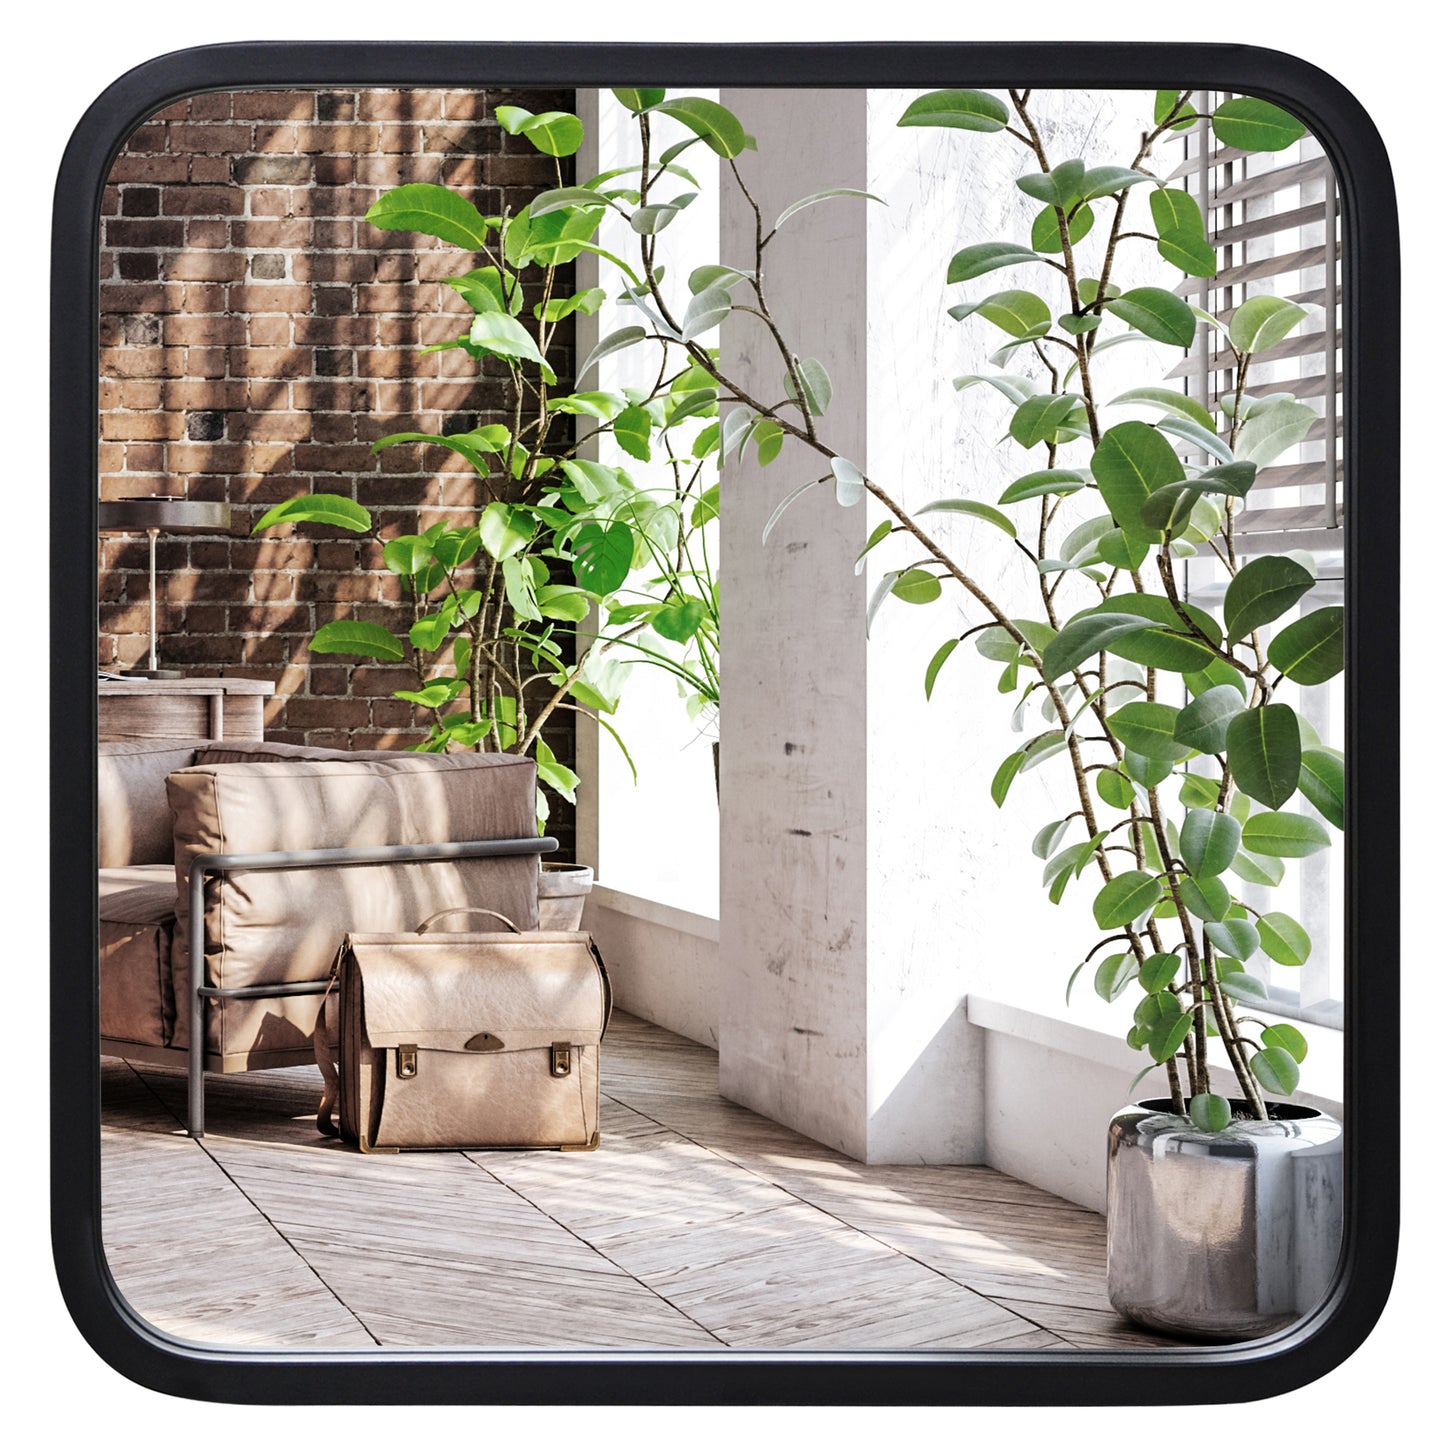 Square Black Frame Mirror with Rounded Corners - Modern Wall Mirror for Bathroom, Bedroom, and Living Room - Framed Mirror with Built-in Hanger